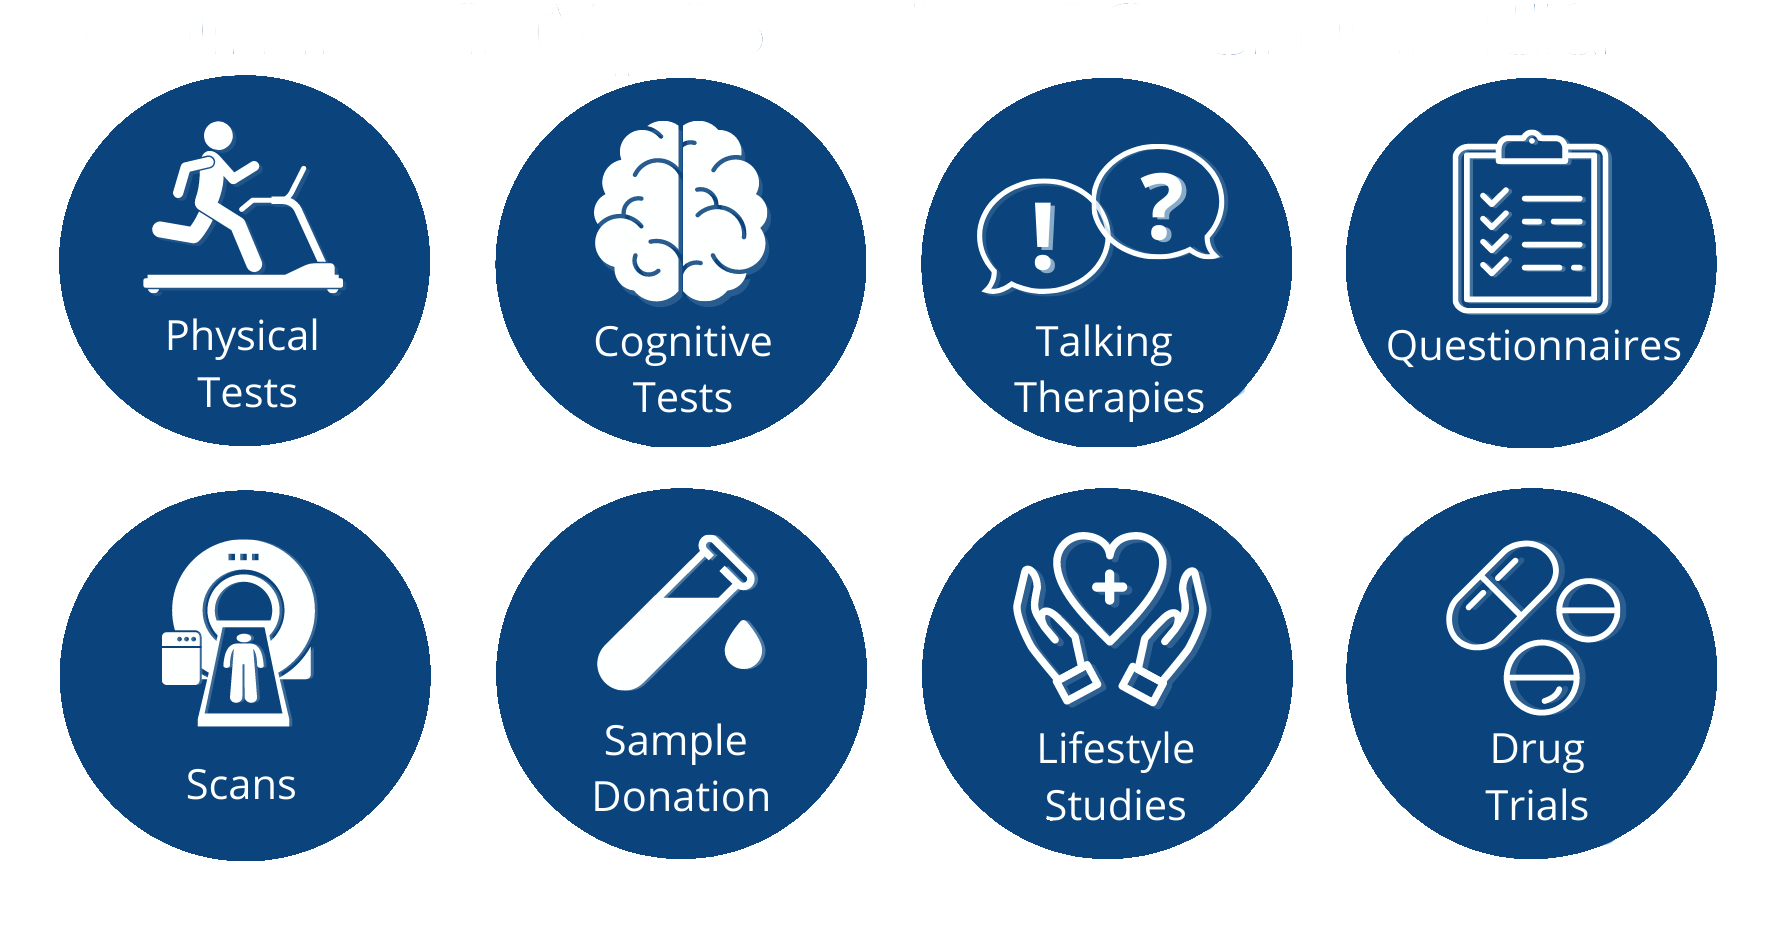 Image showing different types of research, which includes physical tests, cognitive tests, talking therapies, questionnaires, scans, sample donations, lifestyle studies, drug trials